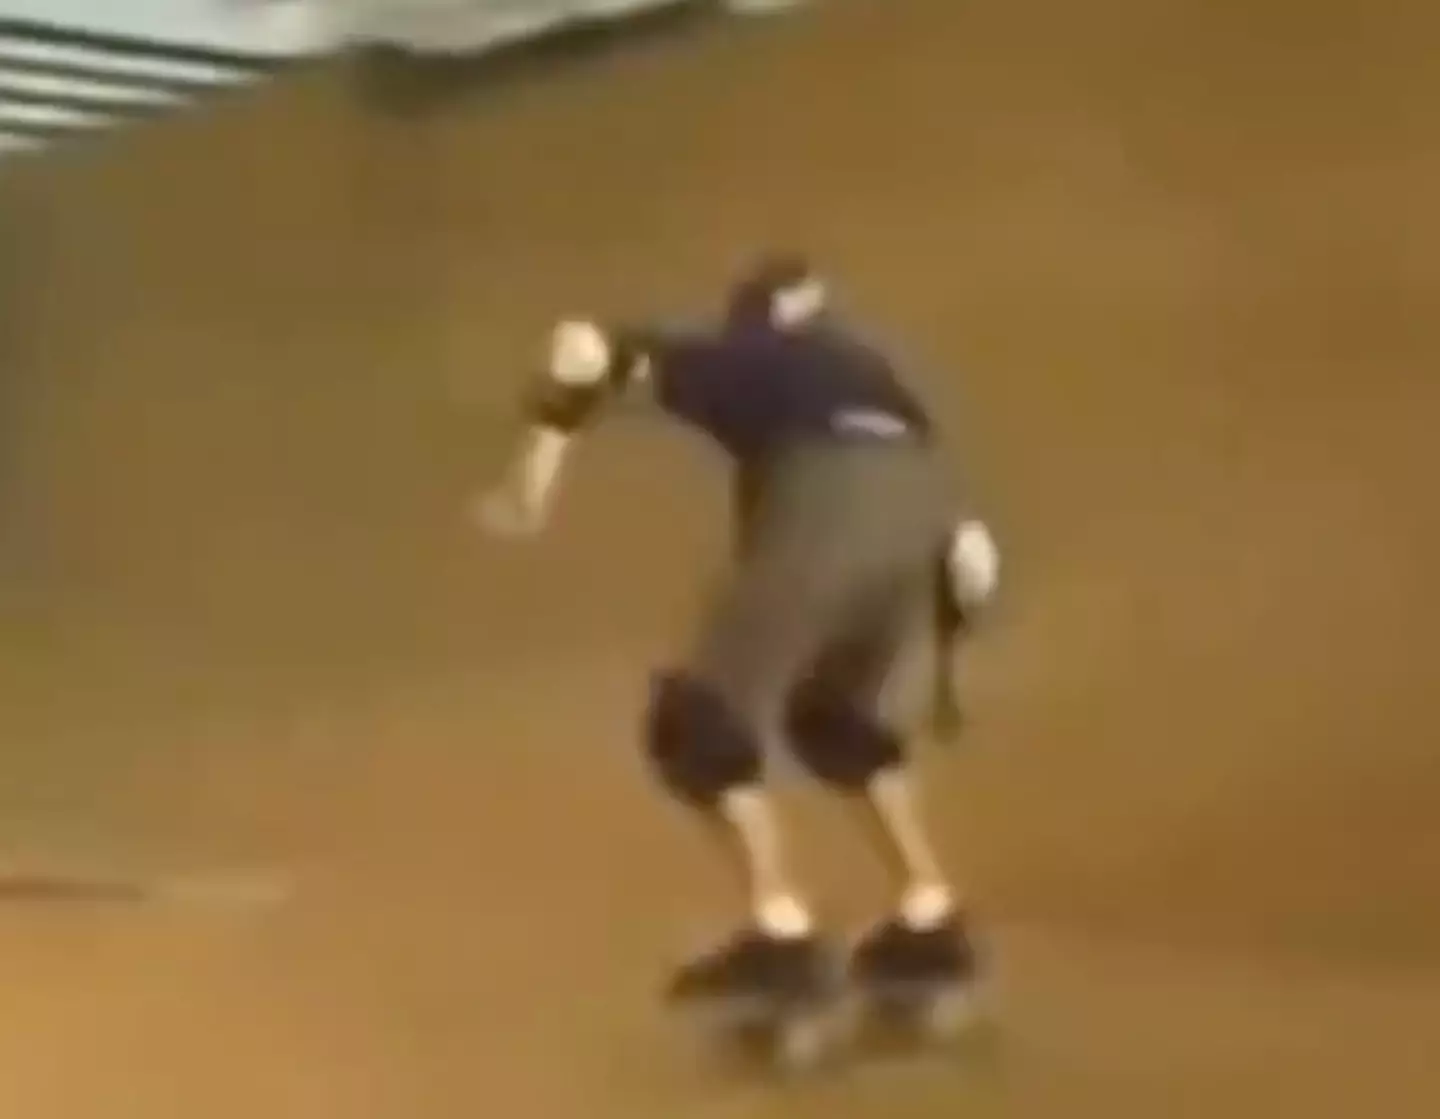 Hawk completed the trick during the 1999 X Games.